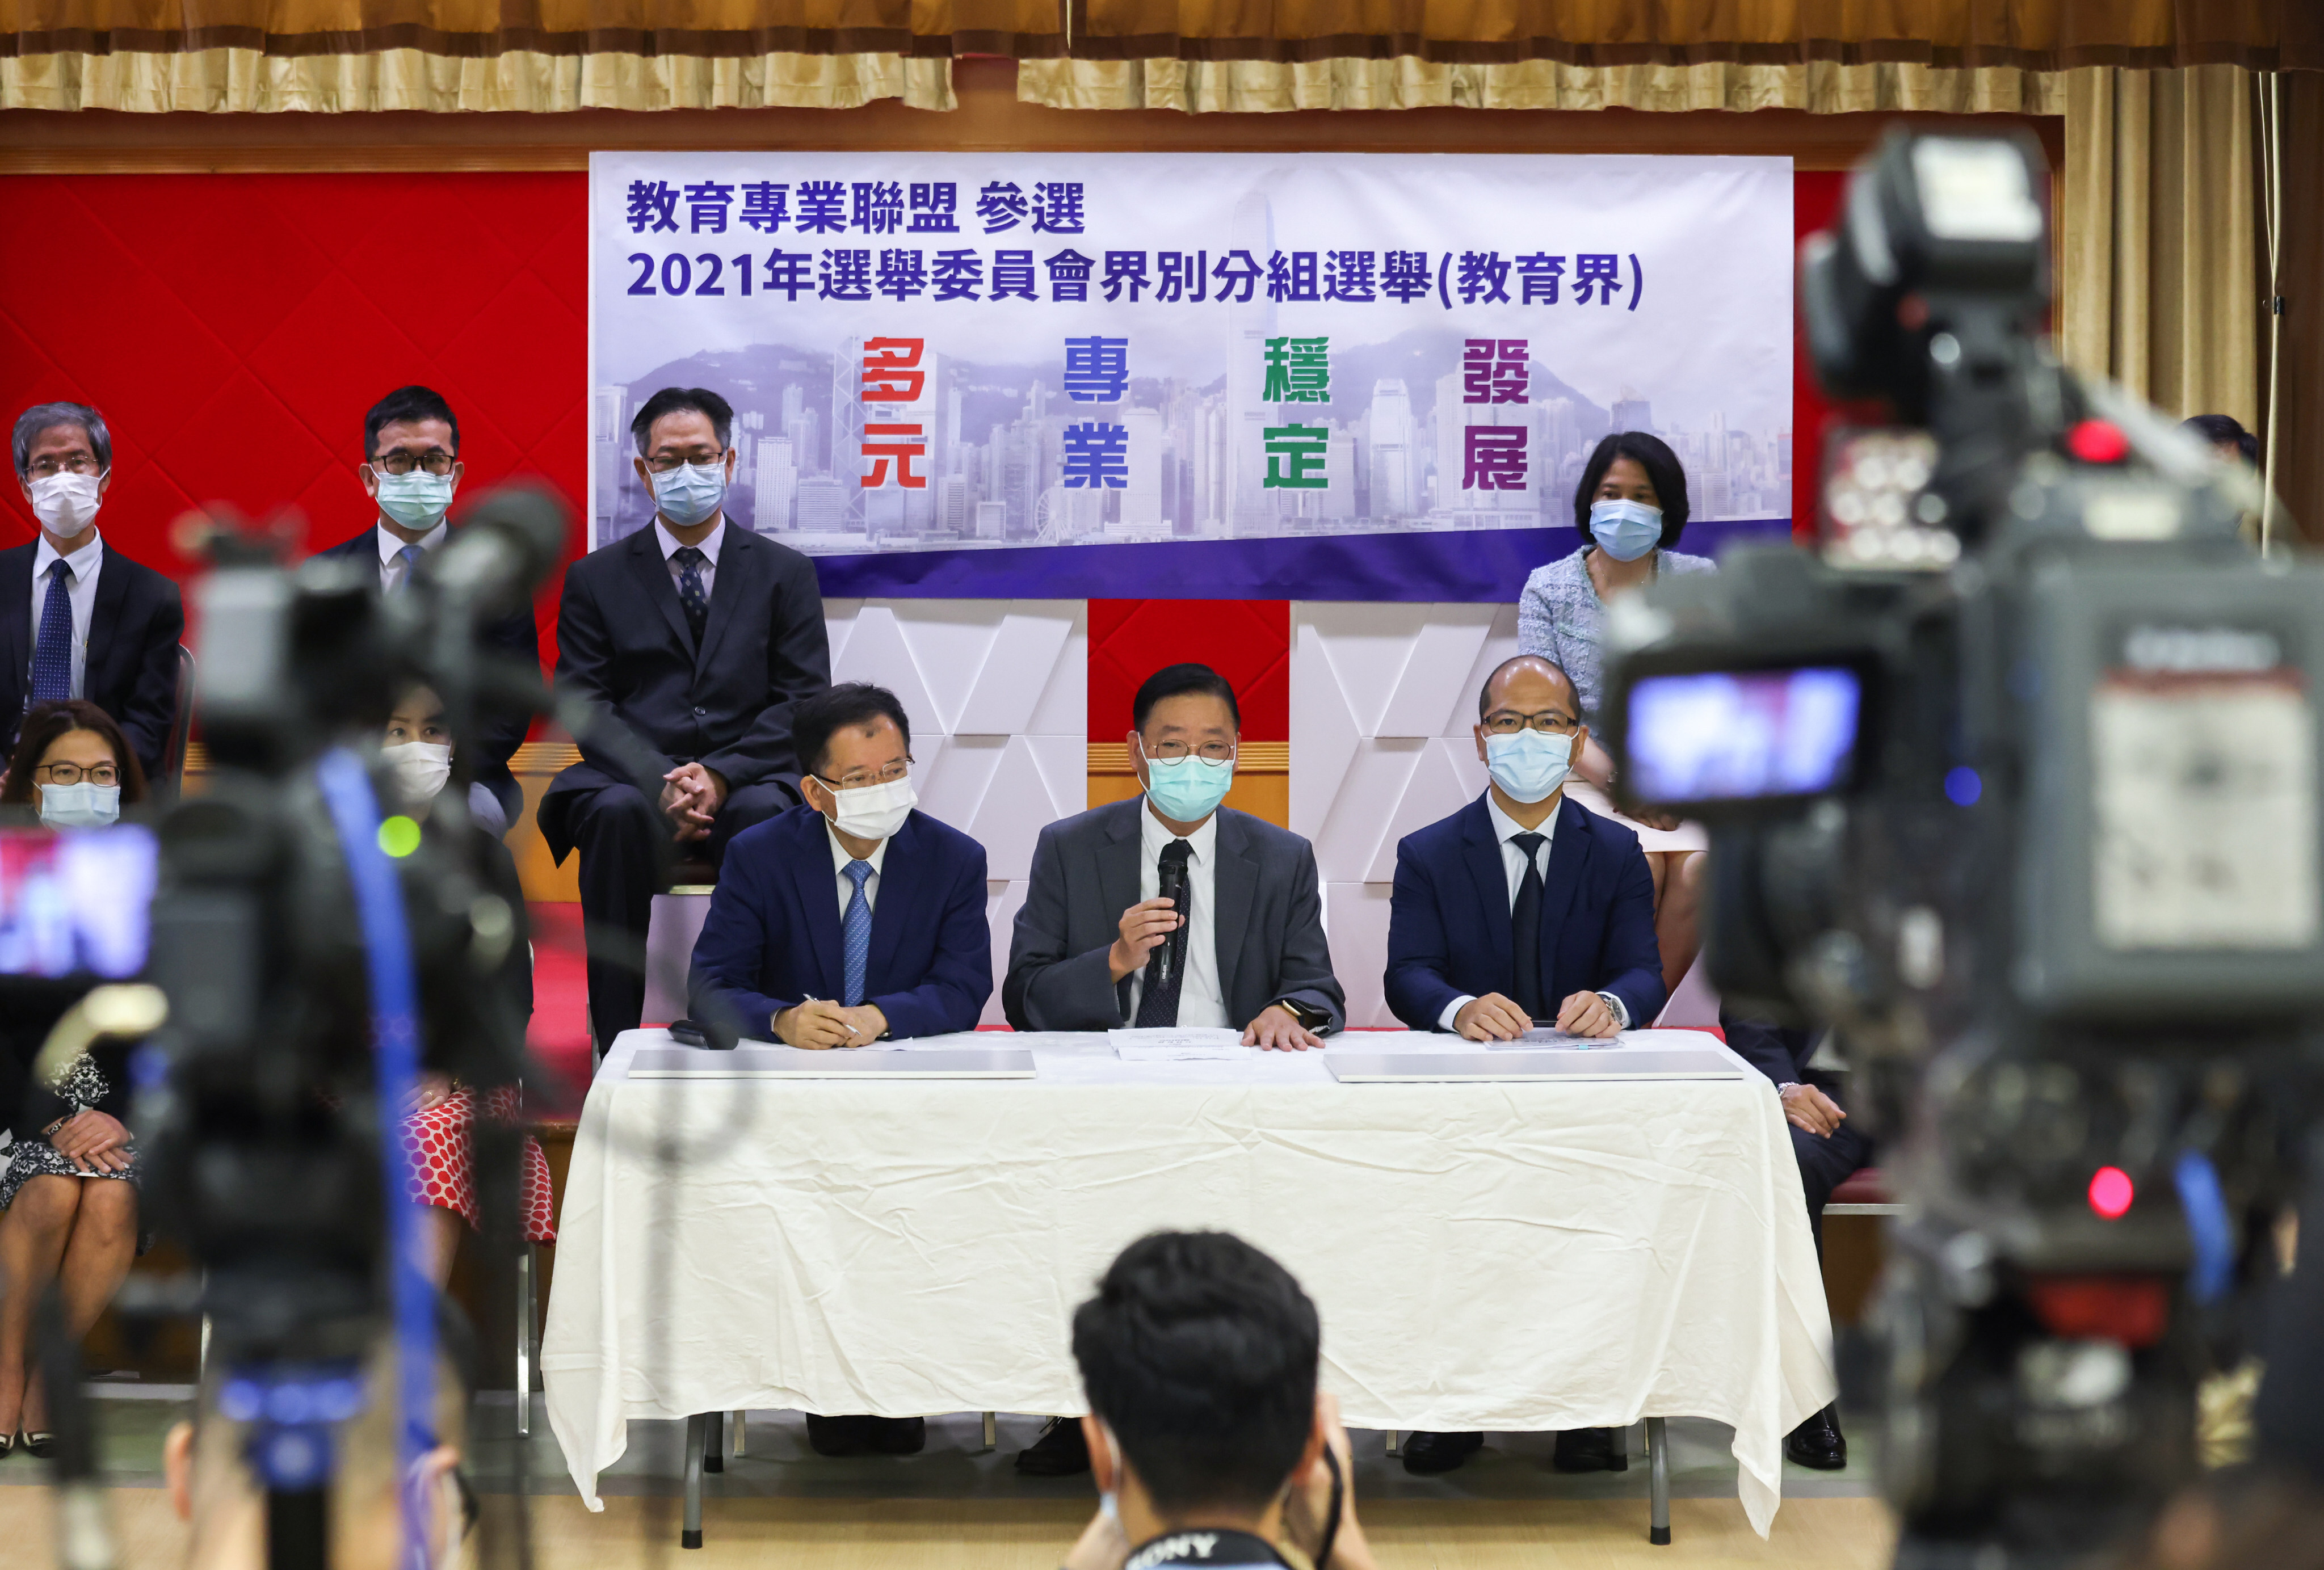 Thirteen educators, including (front, from the left) Ho Hon-kuen, Chiu Cheung-ki and Wong Kam-leung, hold a press conference at Causeway Bay Victoria Kindergarten & International Nursery on August 9 before they submit their applications to contest the Election Committee education subsector election. Photo: Nora Tam